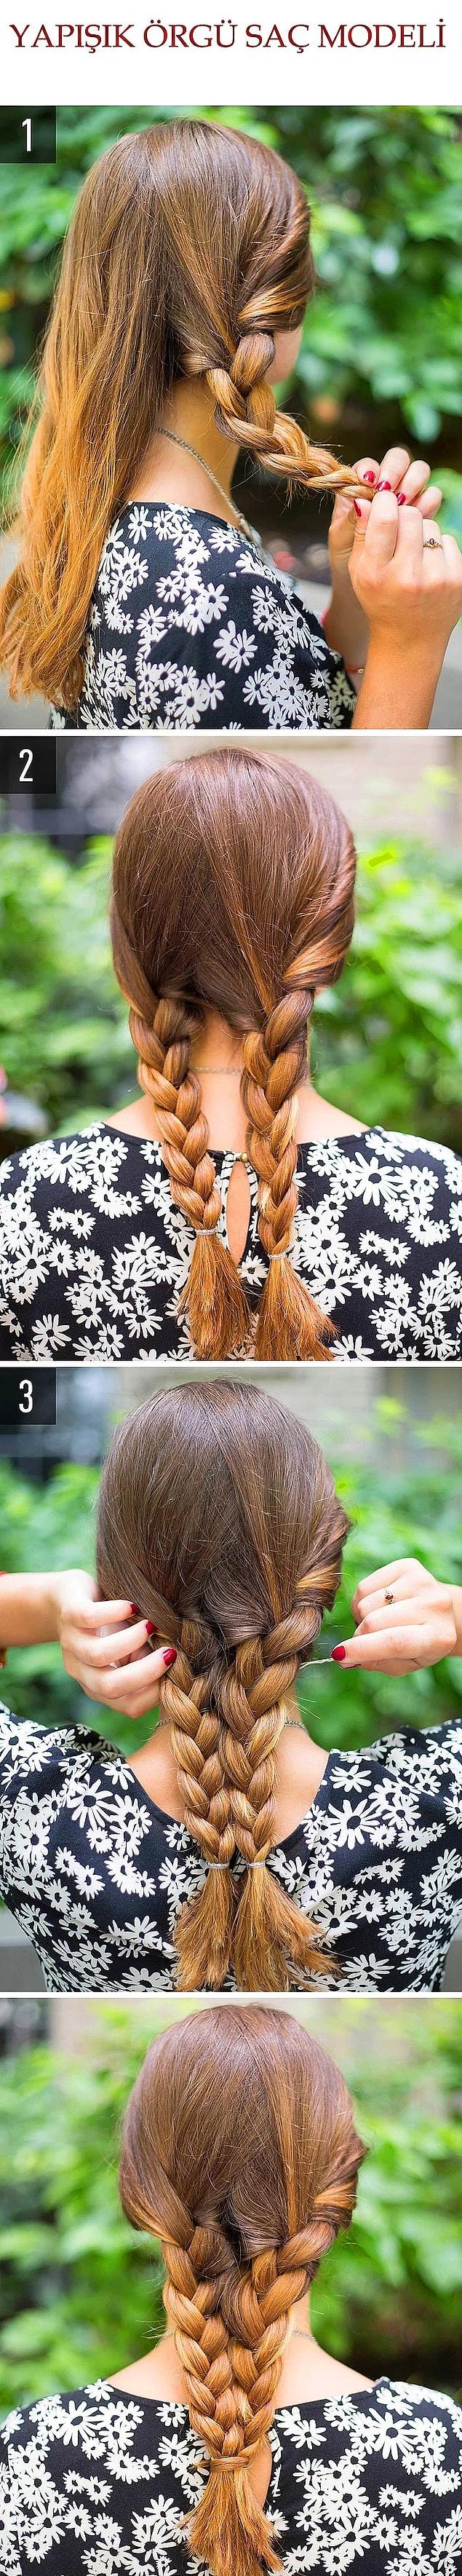 22. Combine two braids with bobby pins and secure it with your hair at the end.